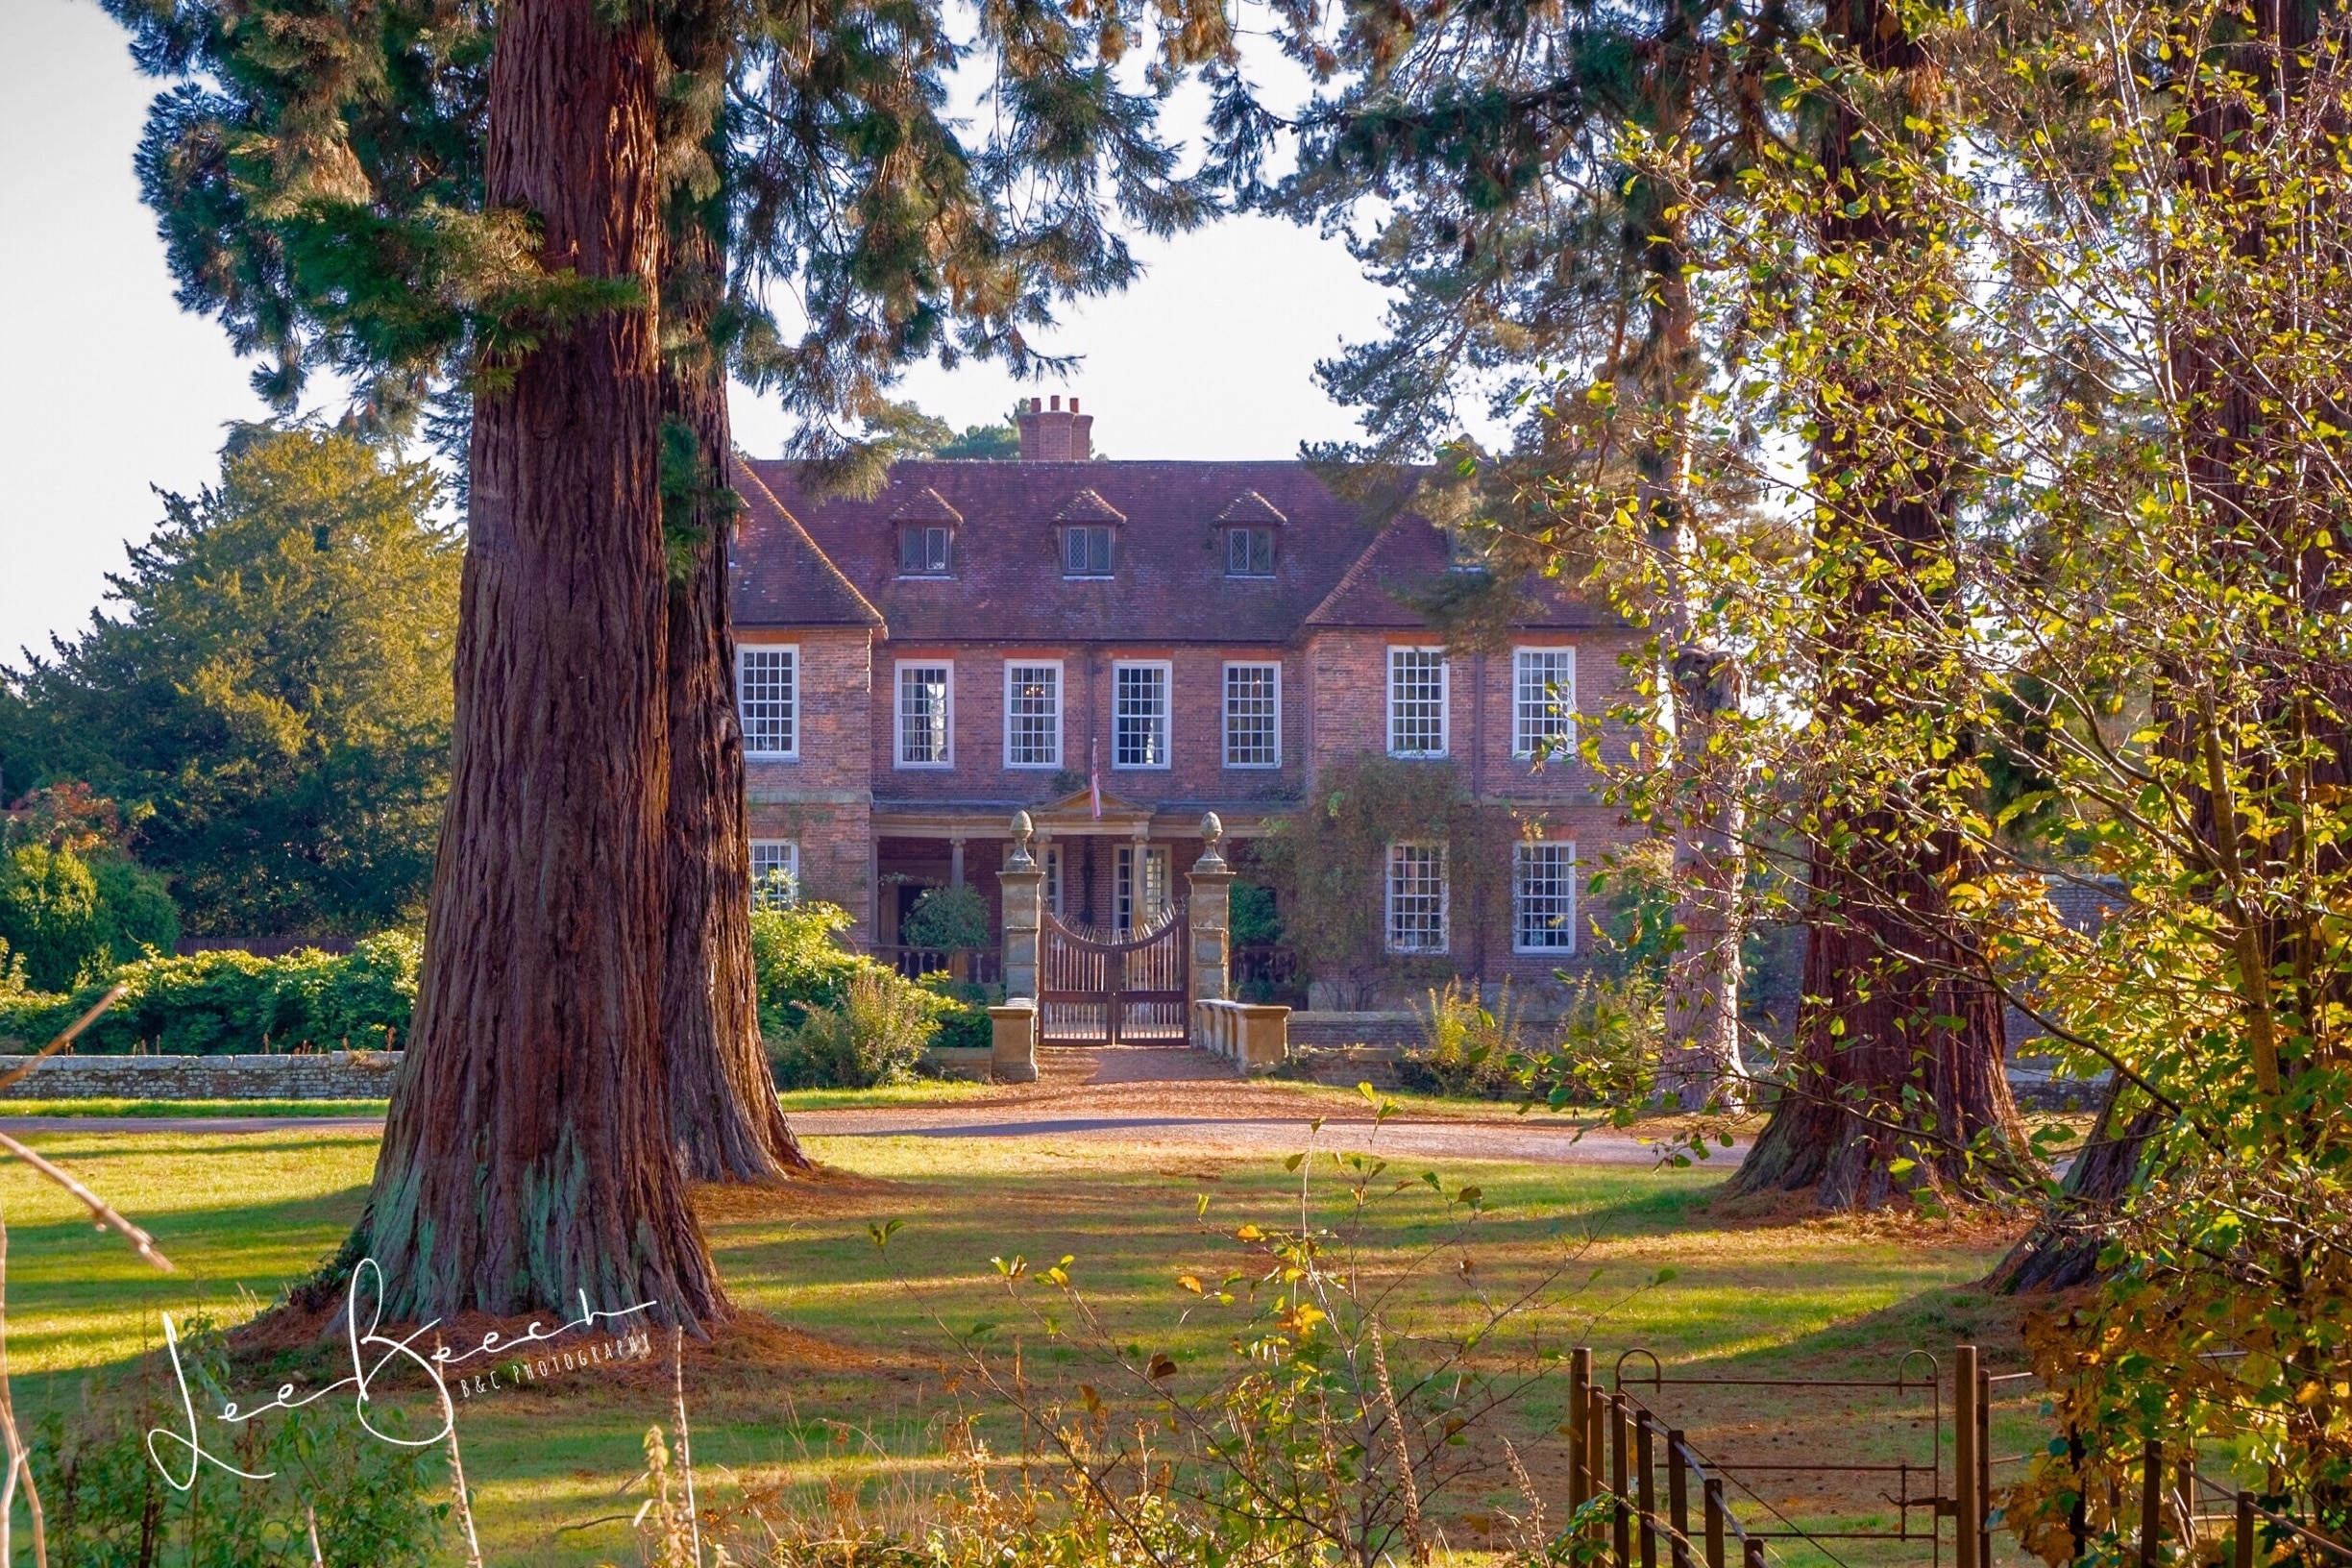 A beautiful historic building situated in the village of Groombridge Kent.